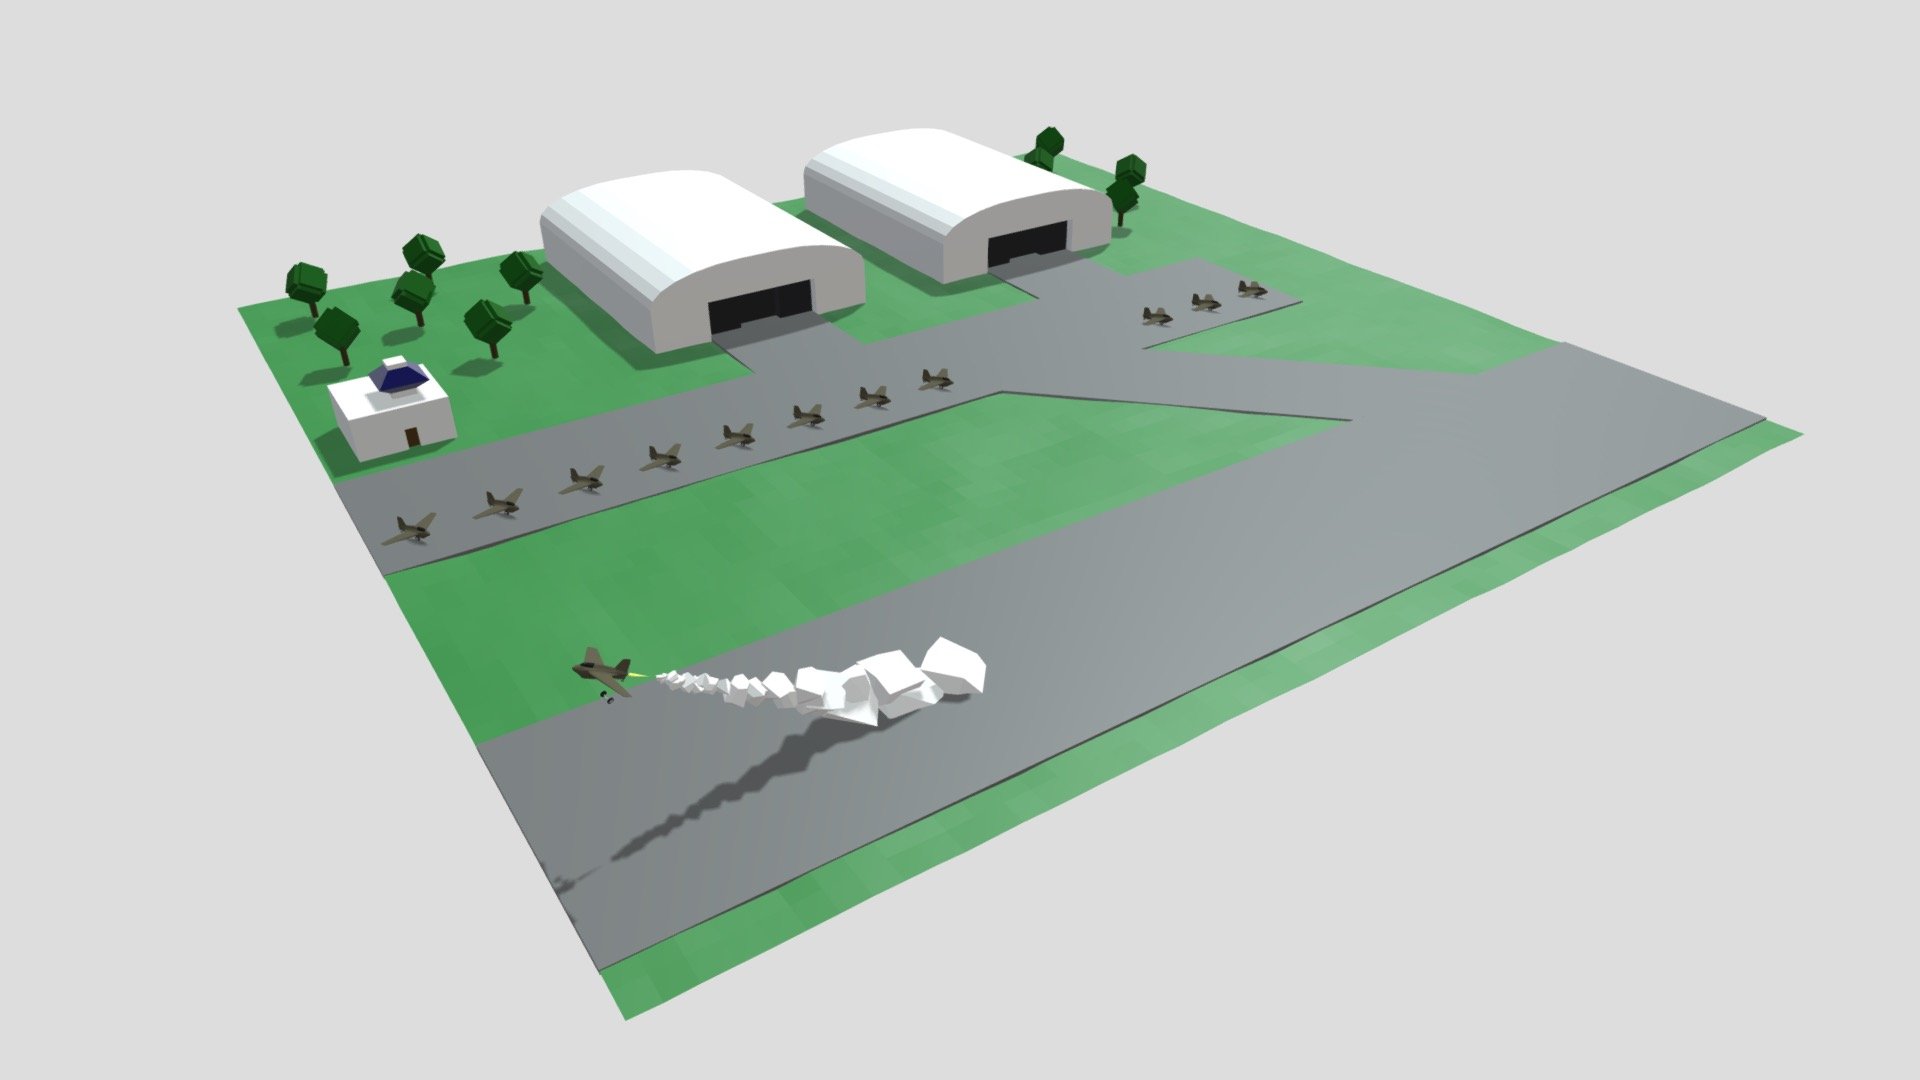 A small frontline airbase housing a squadron of Me 163 rocket interceptors. My first creation in Blender 3d model